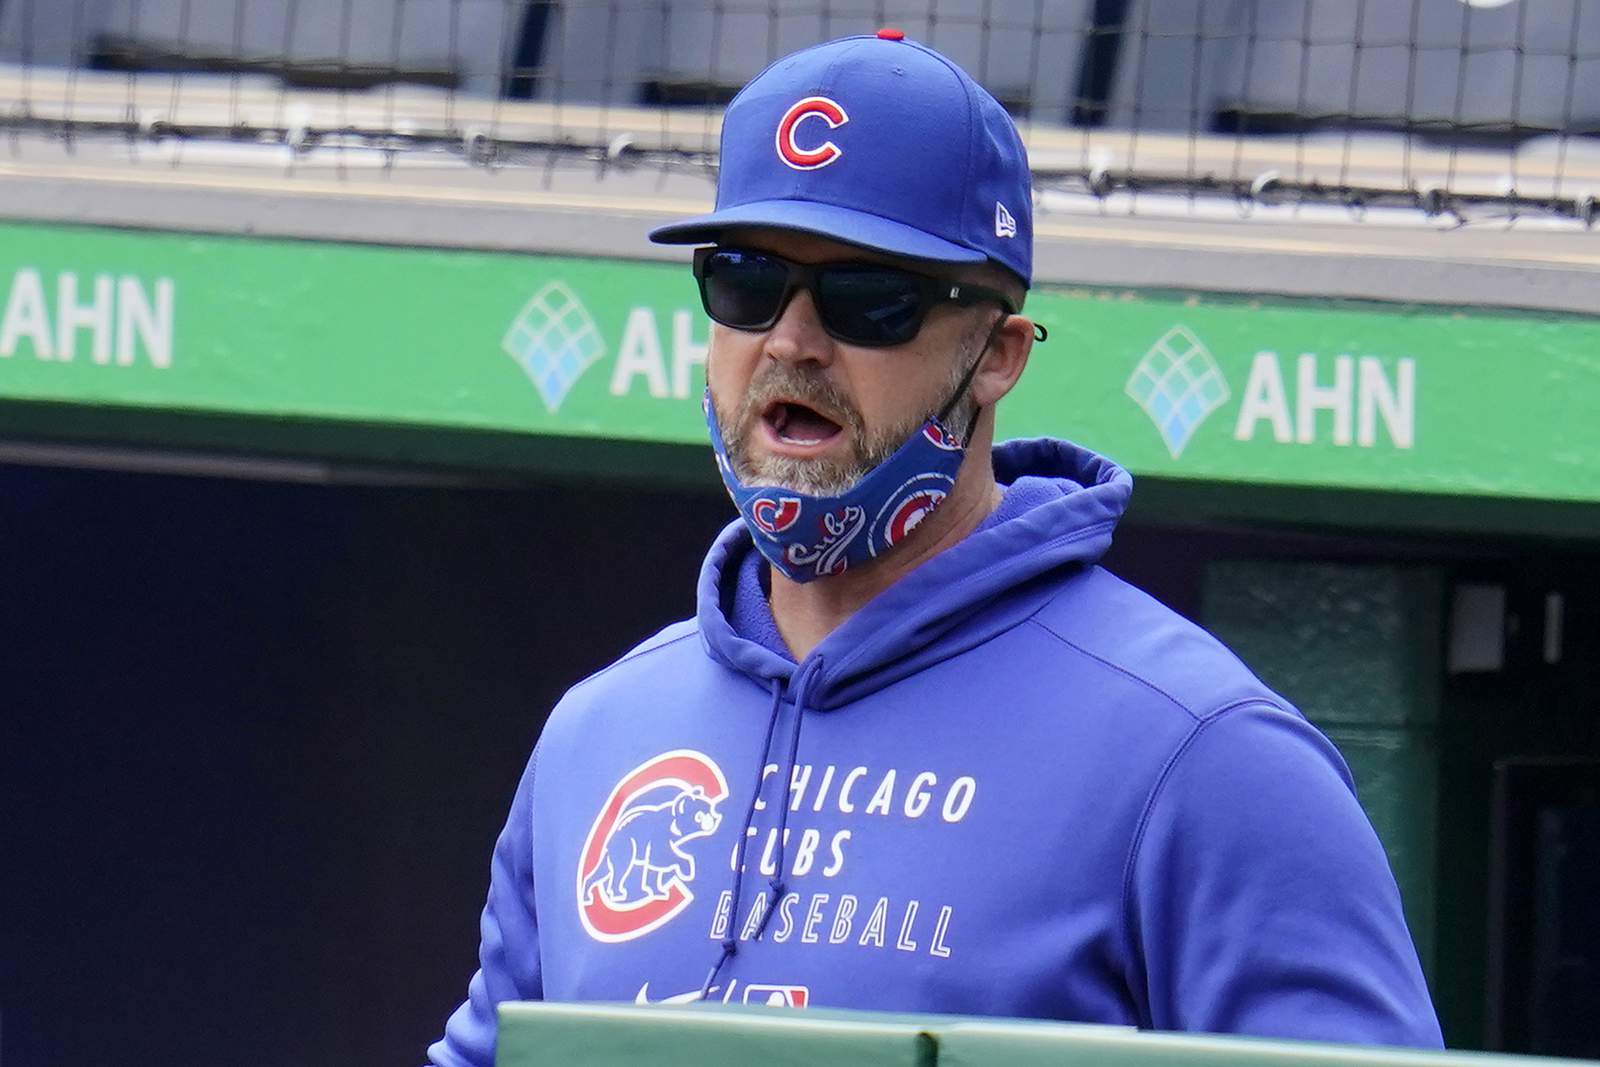 The Latest: Cubs manager says no player has tested positive